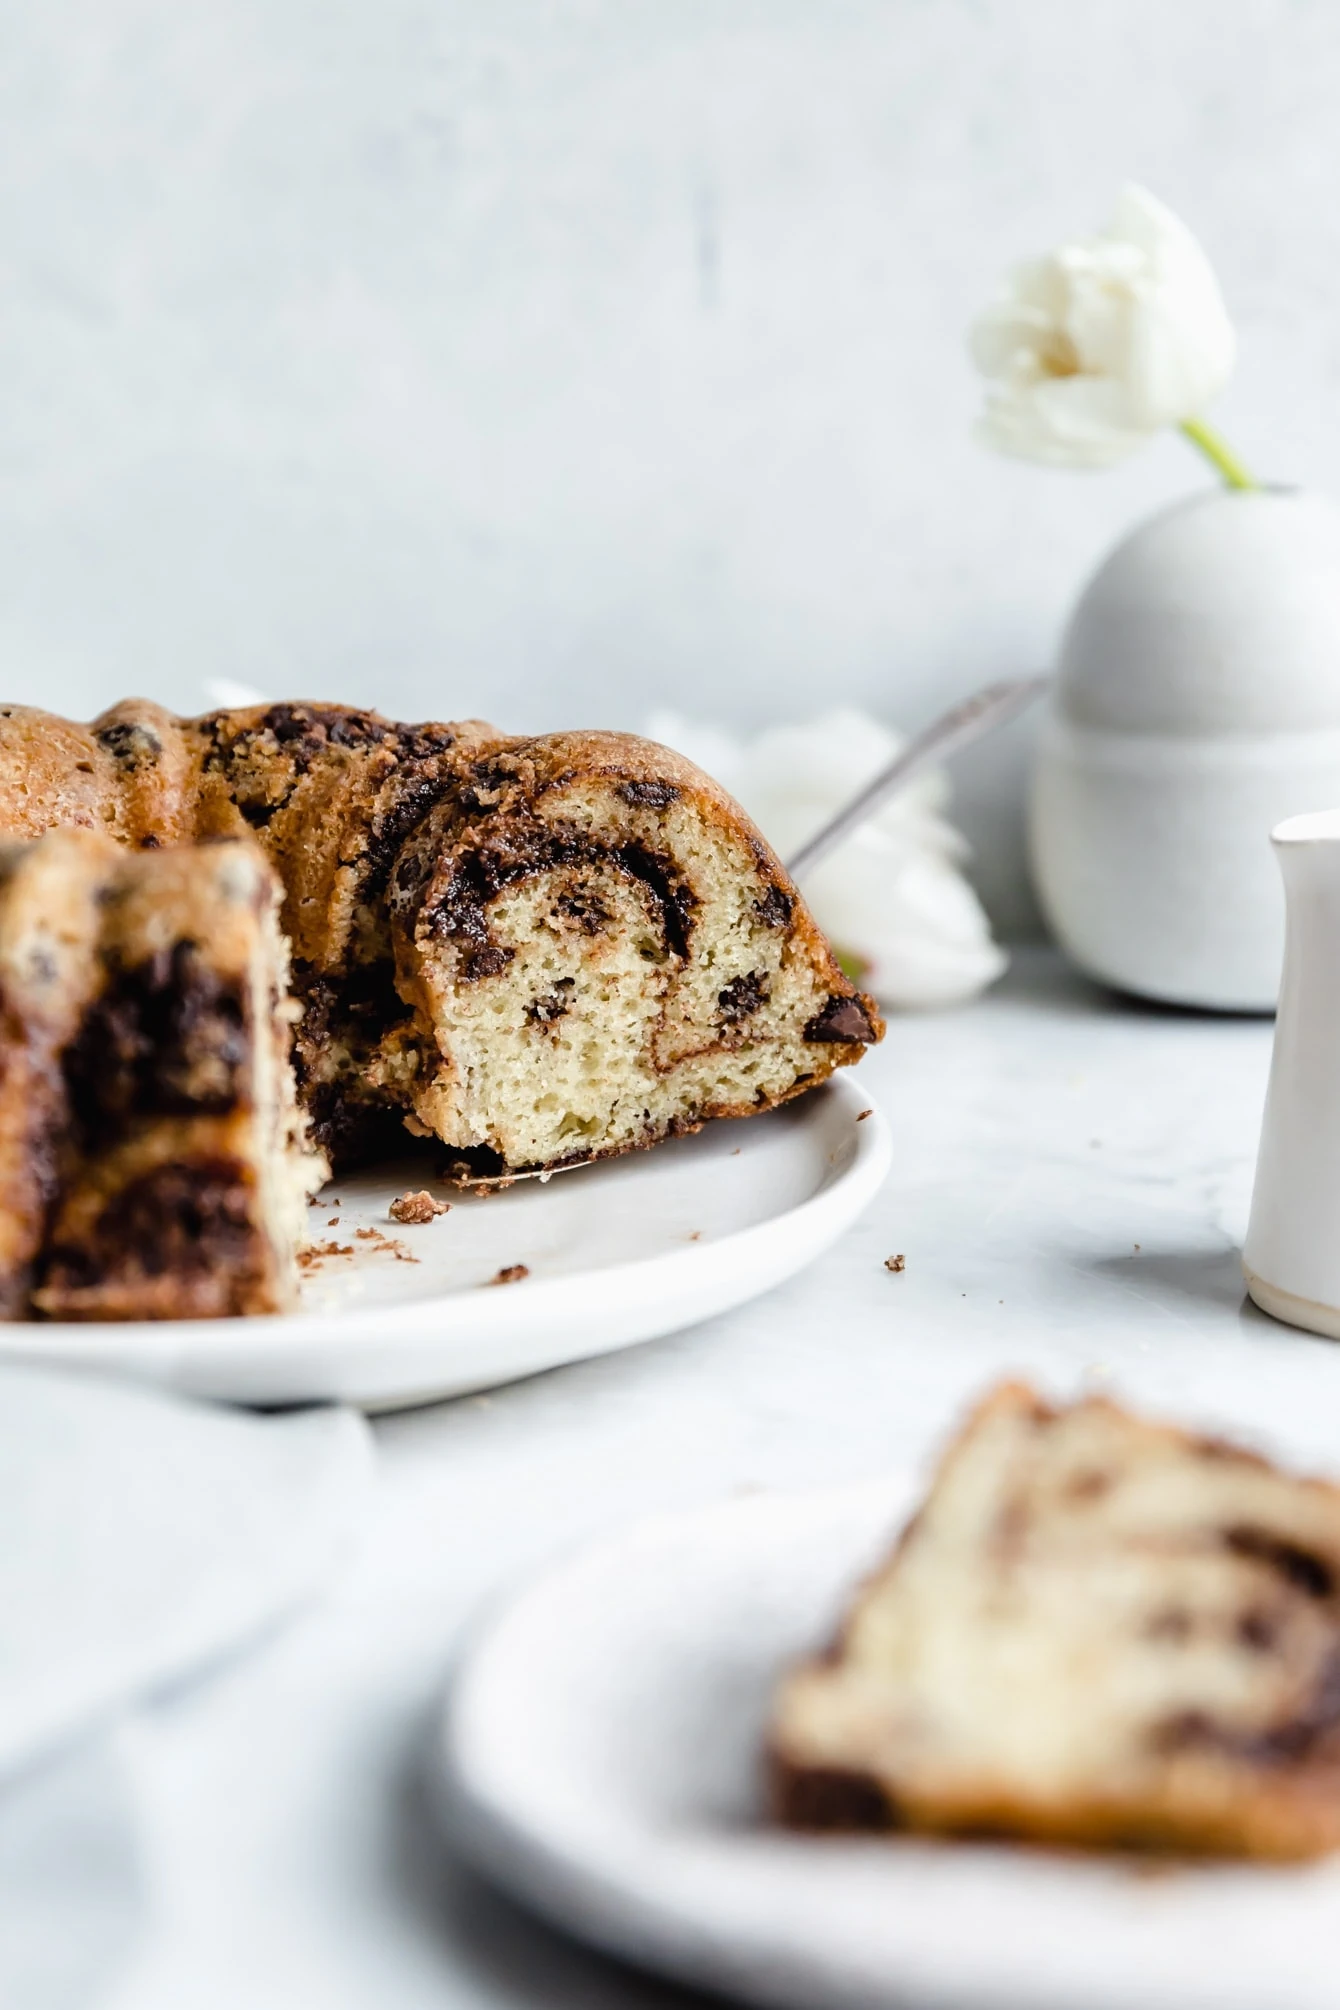 I love a good dessert disguised as breakfast. This buttery and moist Cinnamon Chocolate Chip Coffee Cake is sure to make your morning a little sweeter.